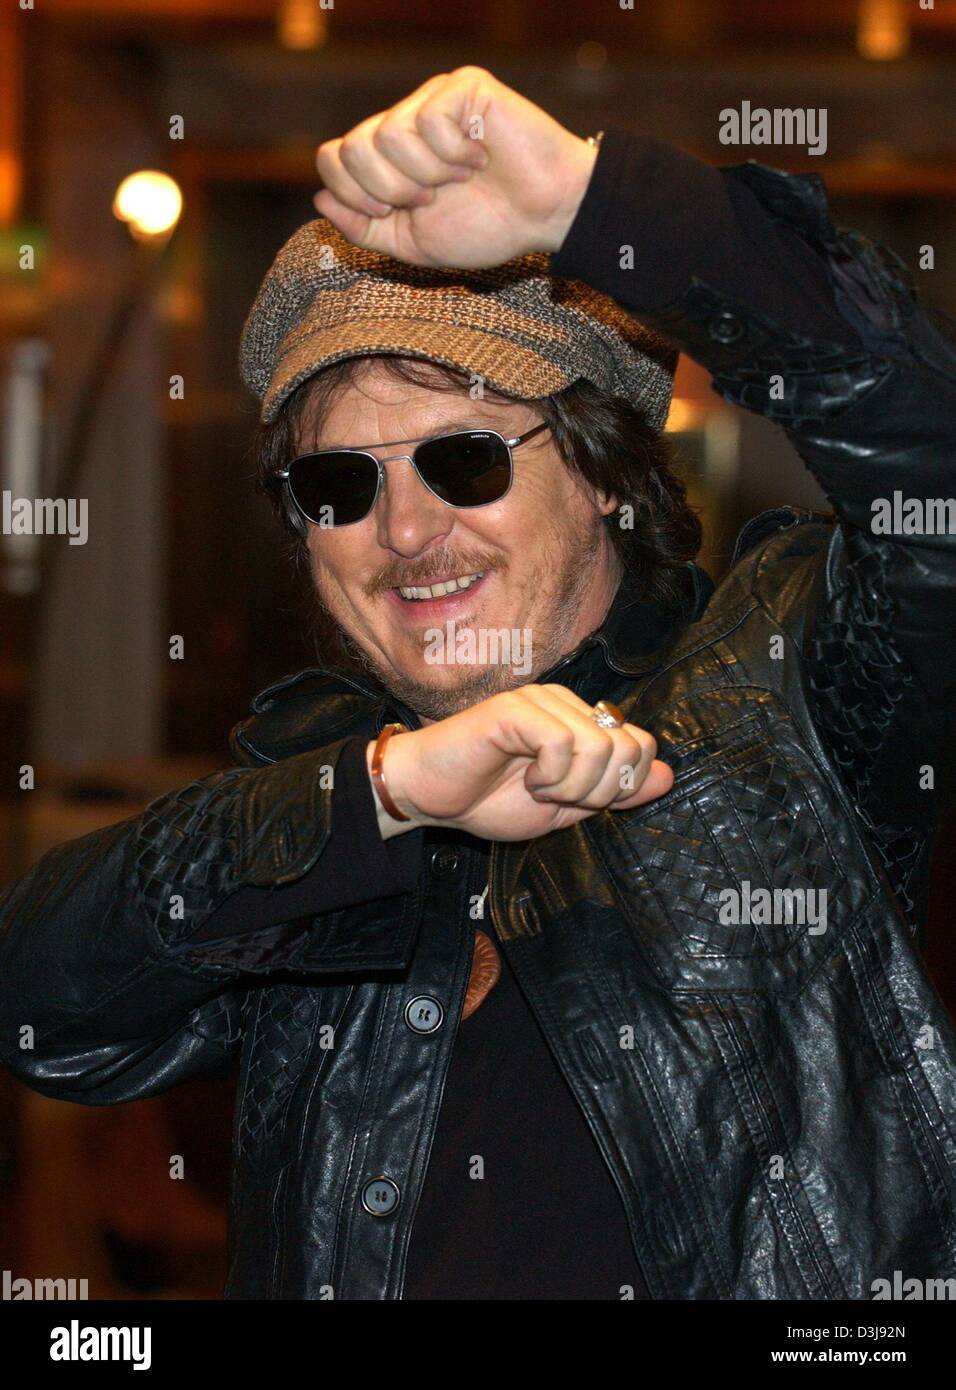 (dpa) - Italian musician, blues singer and song writer Zucchero smiles as he stand in a corridor of a hotel in Hamburg, Germany, 22 April 2004. 48-year-old musician promoted his new album which contains a collection of duets with international singers. The album, which took him 15 years to produce, will be officially introduced during a UN charity concert at London's Royal Albert H Stock Photo